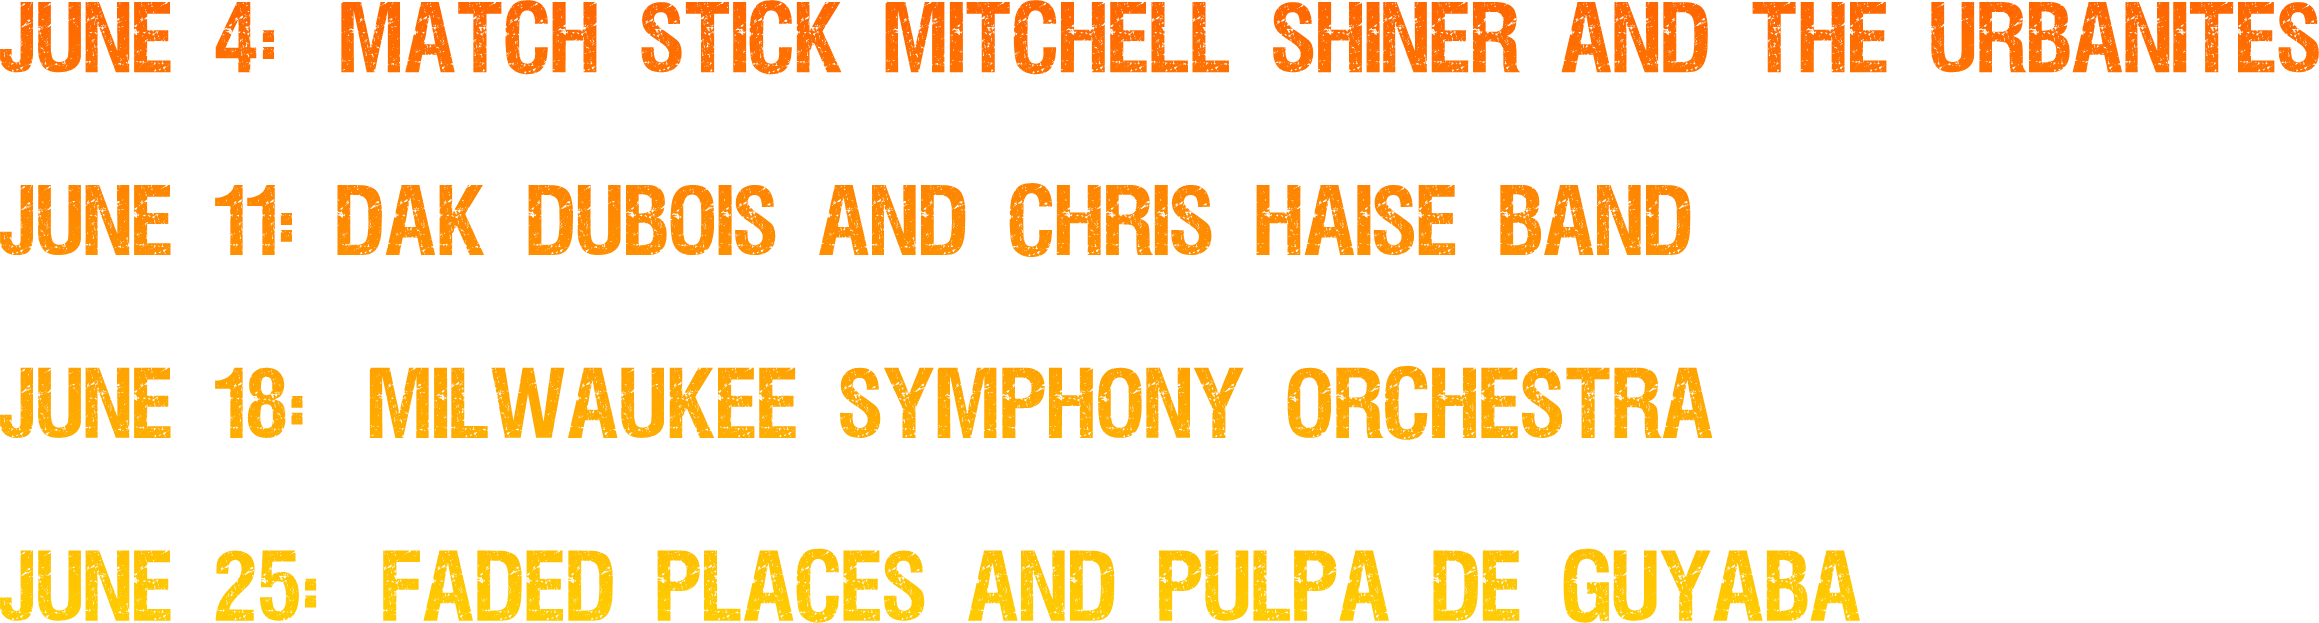 June 4:  Match Stick Mitchell Shiner and The Urbanites

June 11: Dak Dubois and Chris Haise Band

June 18:  Milwaukee Symphony Orchestra

June 25:  Faded Places and Pulpa De Guyaba